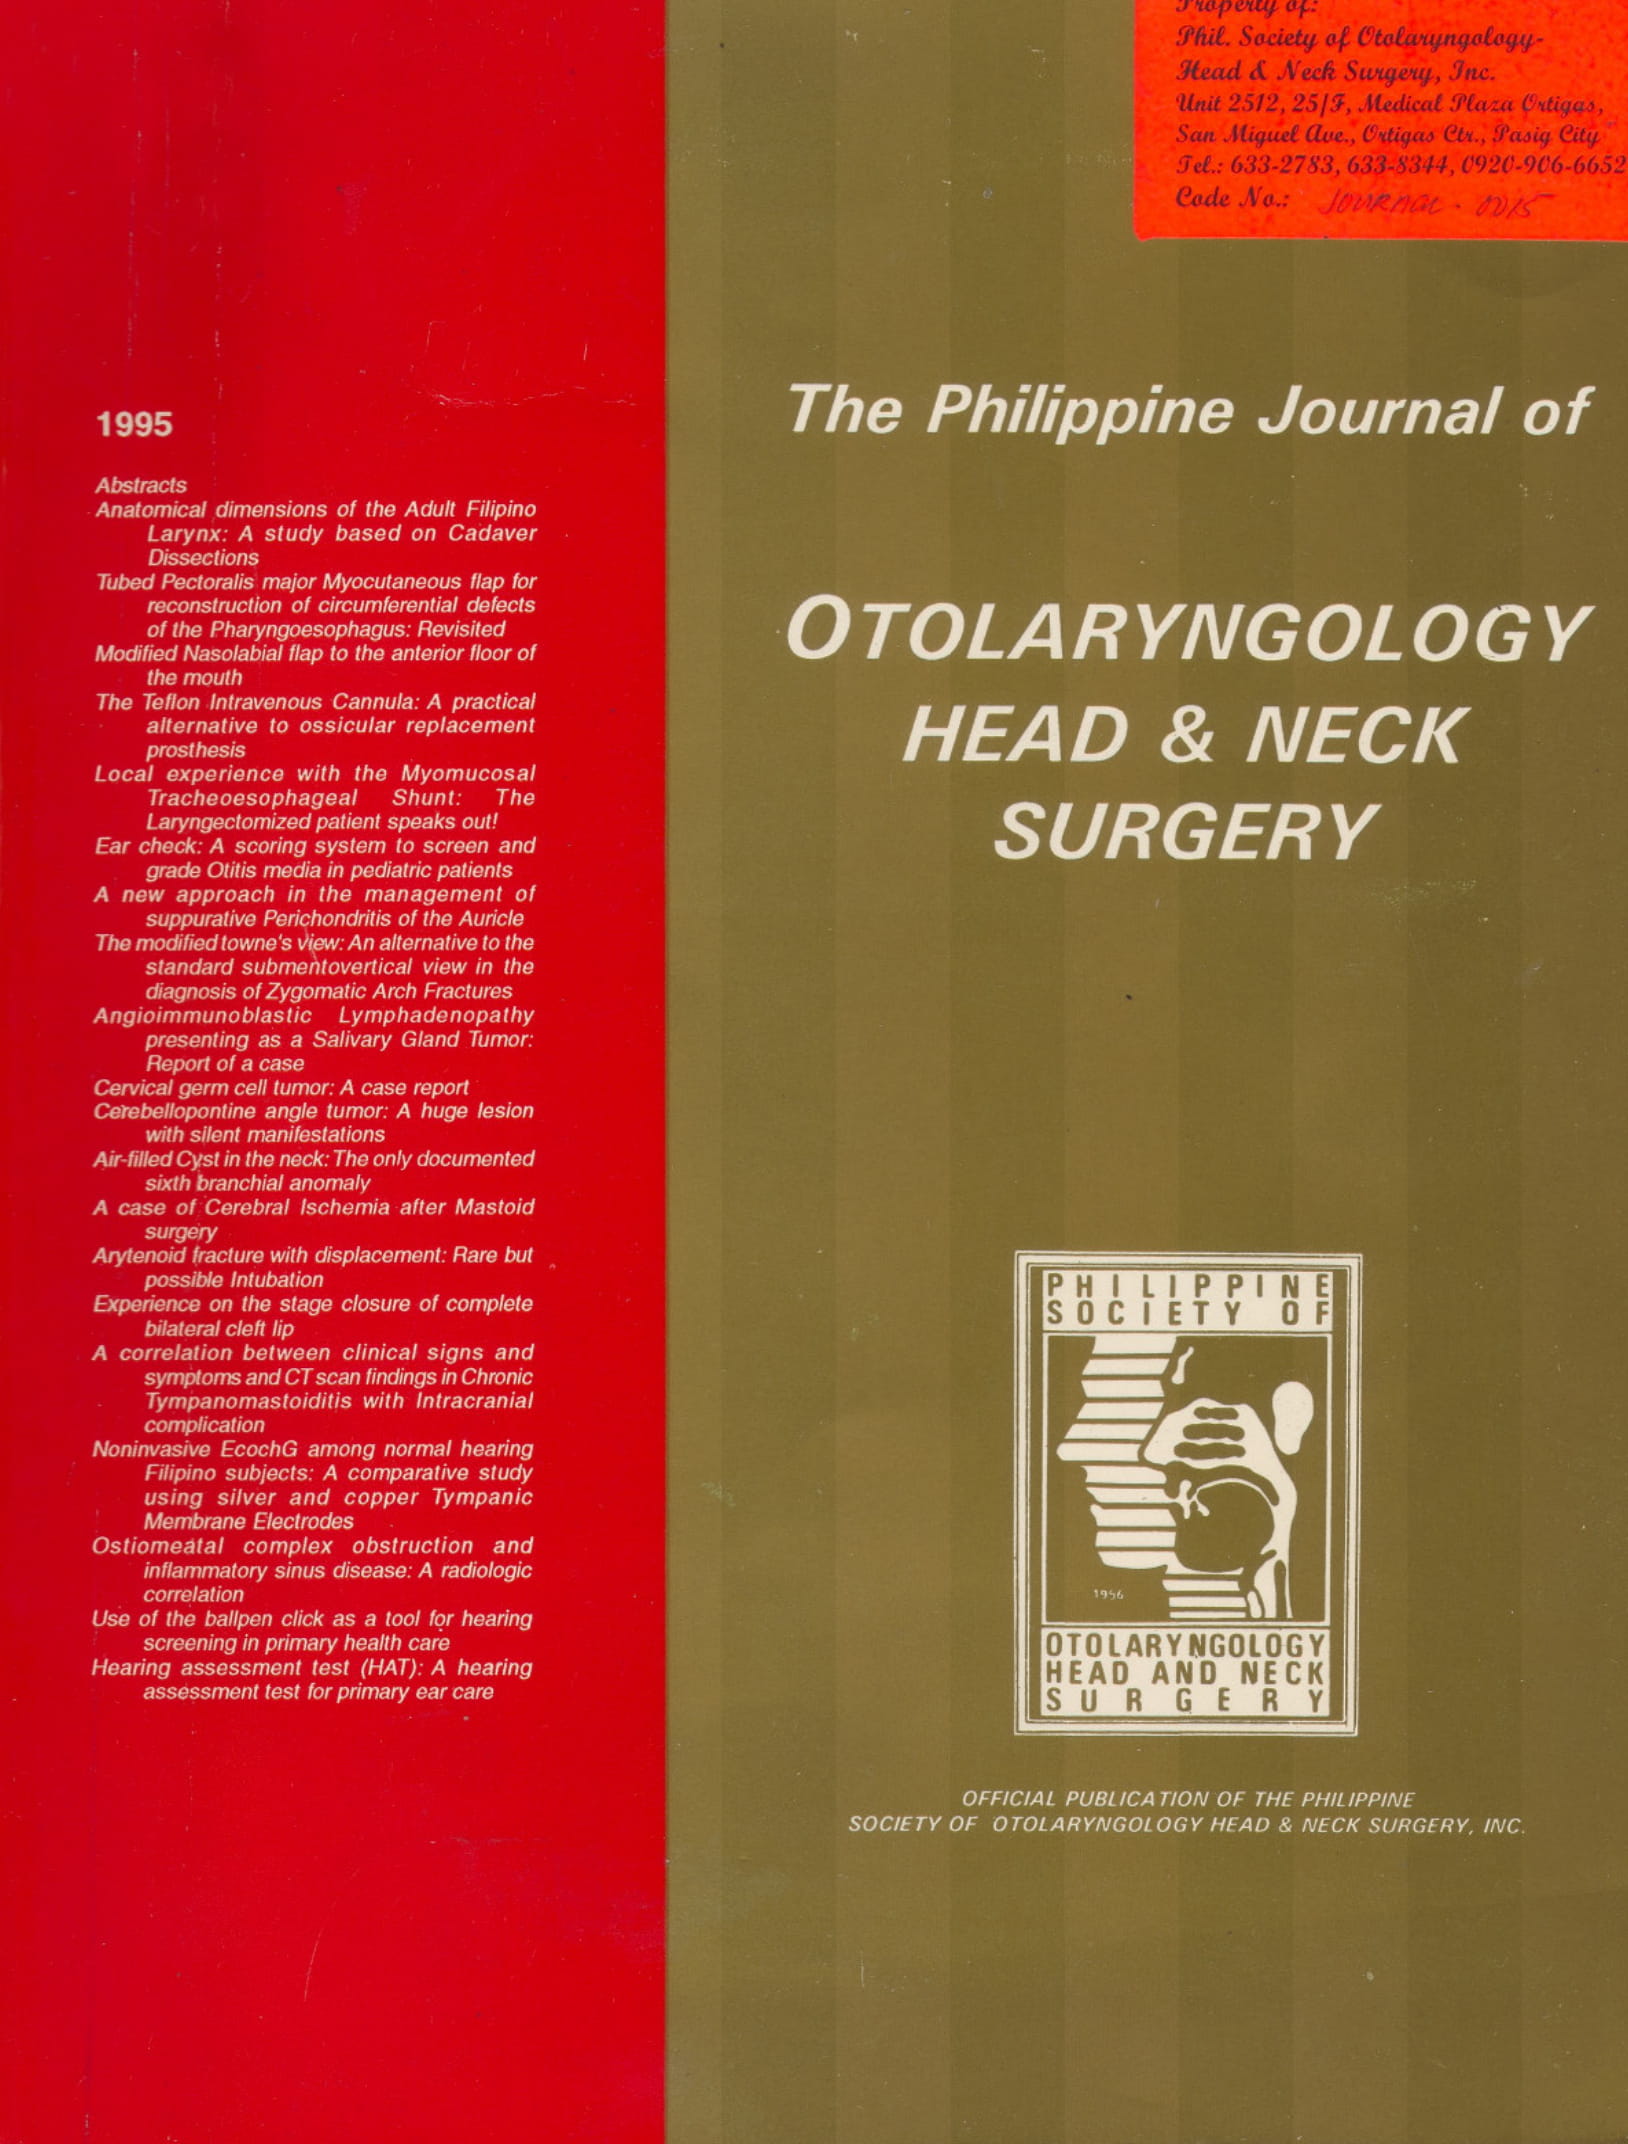 					View 1995: Philippine Journal of Otolaryngology-Head and Neck Surgery
				